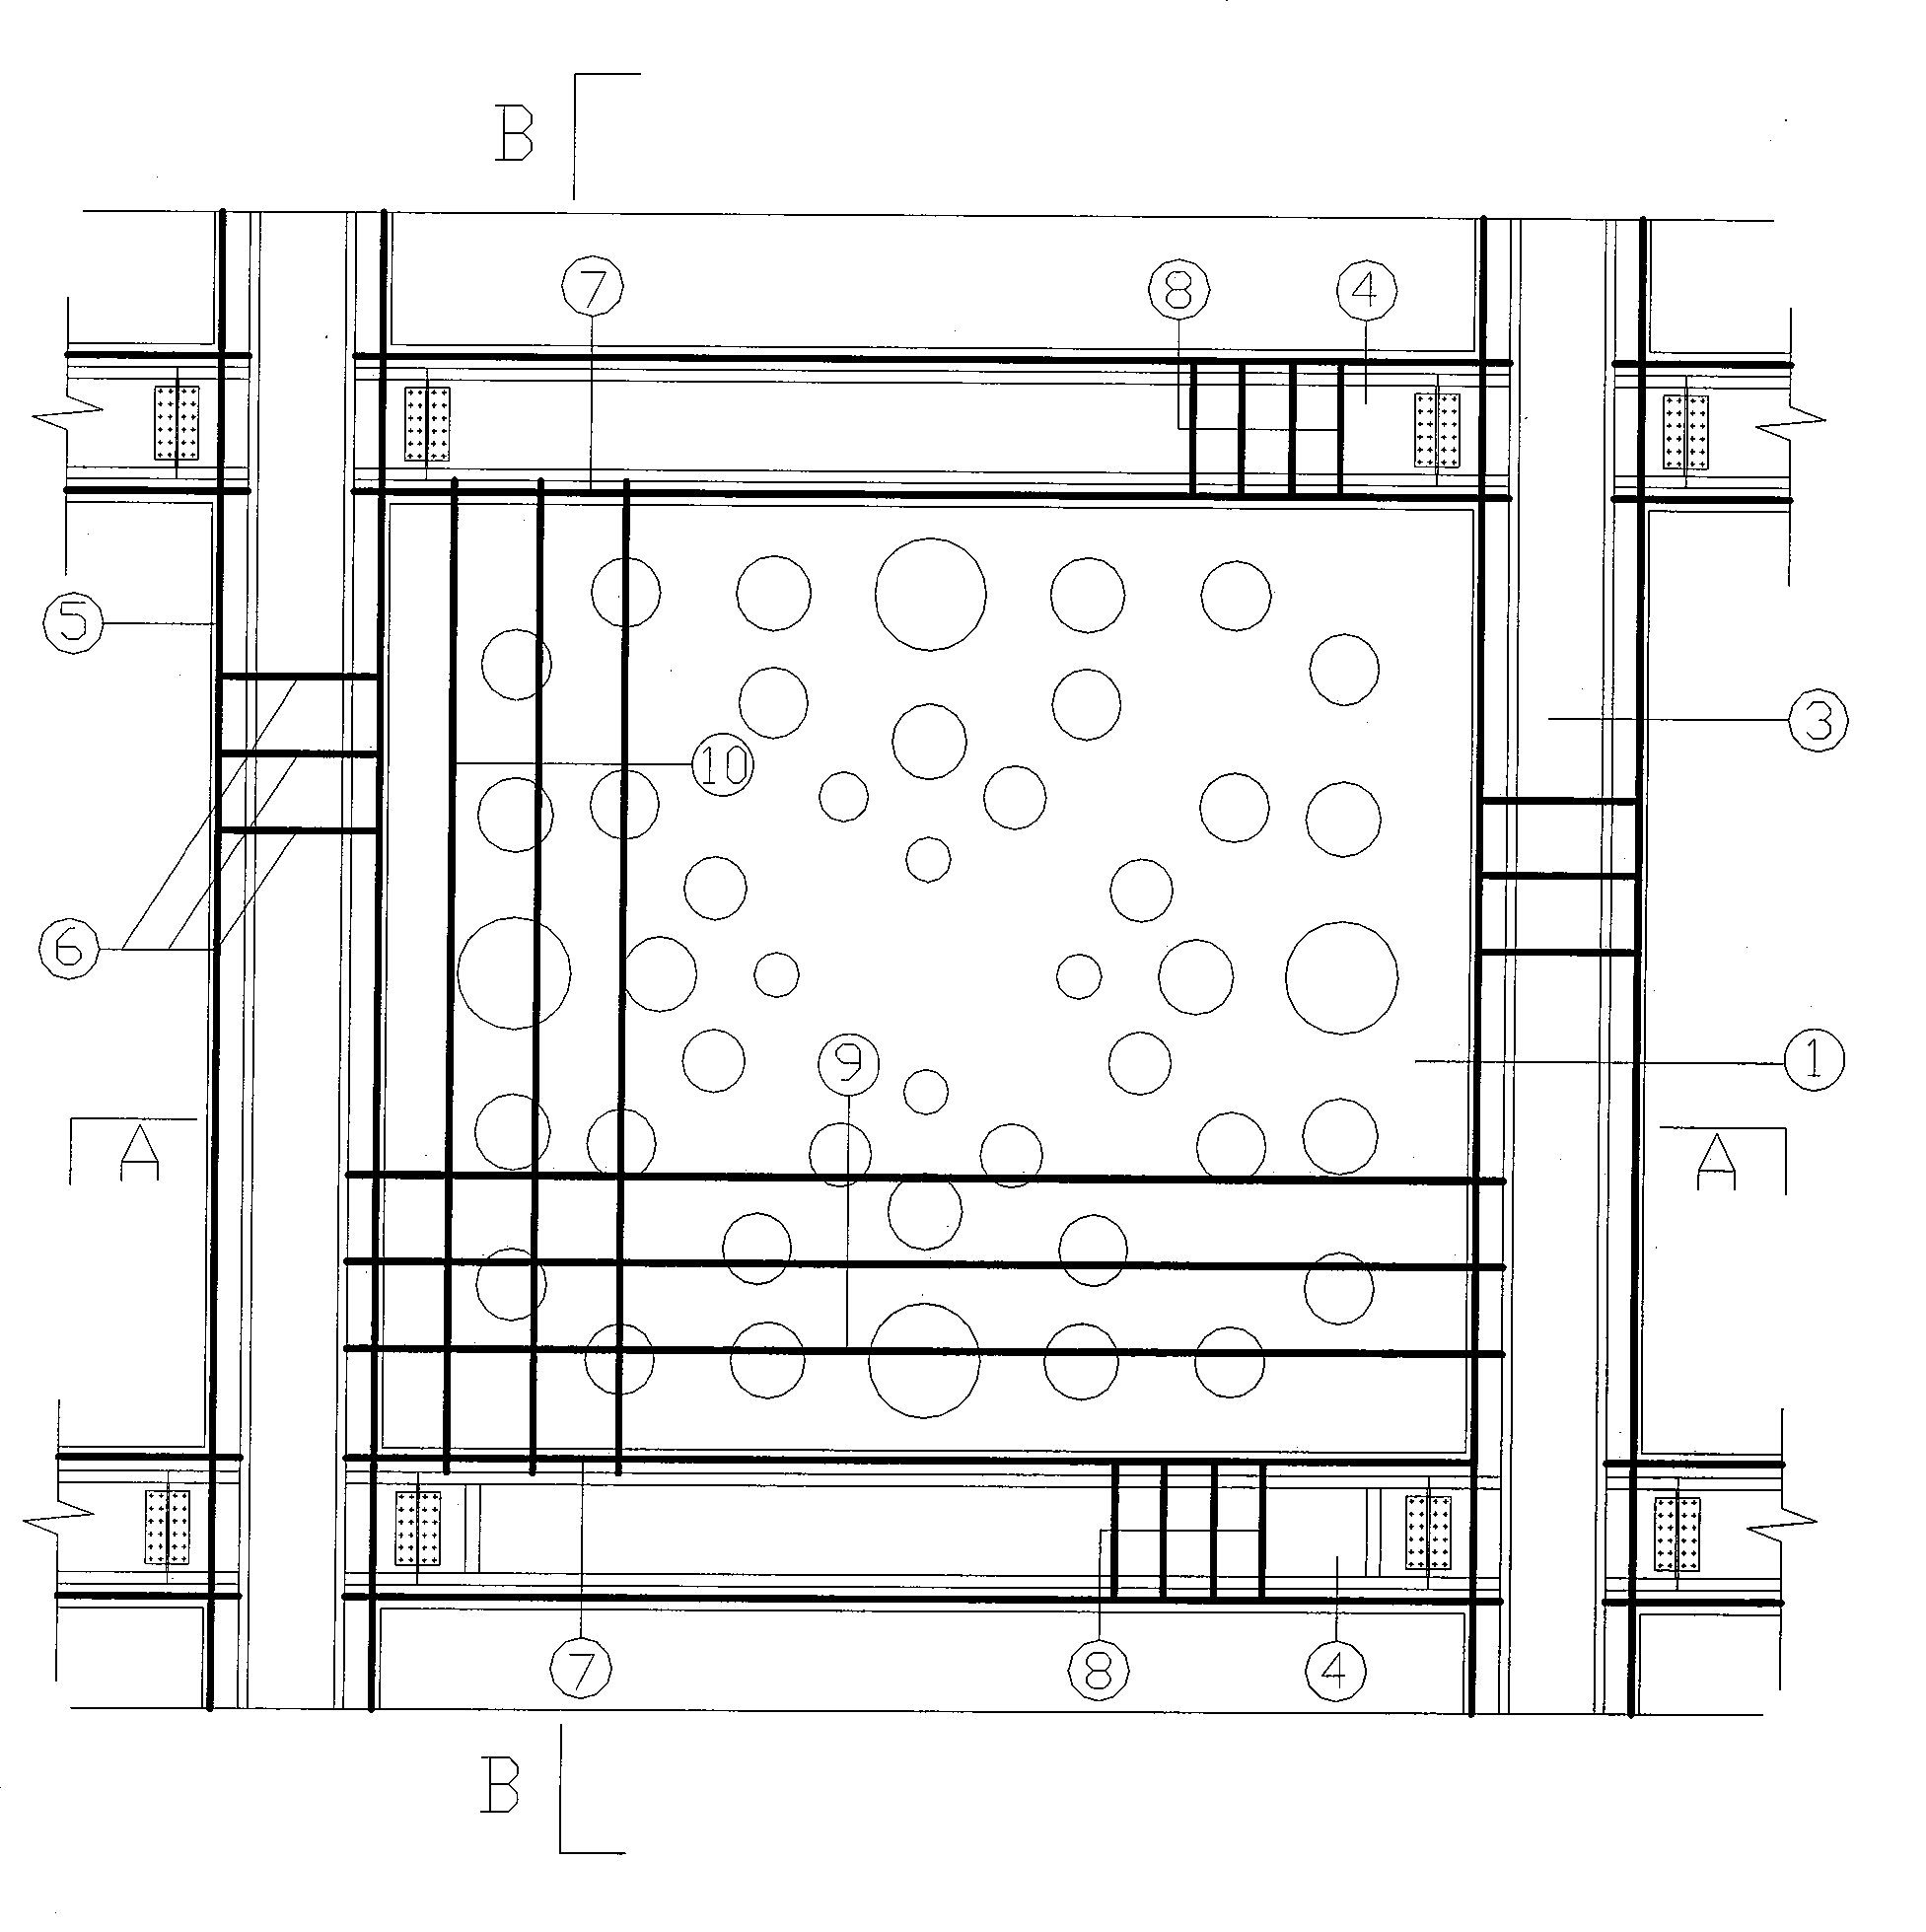 Section steel concrete- punched steel plate-concrete combined shear wall and method for producing the same